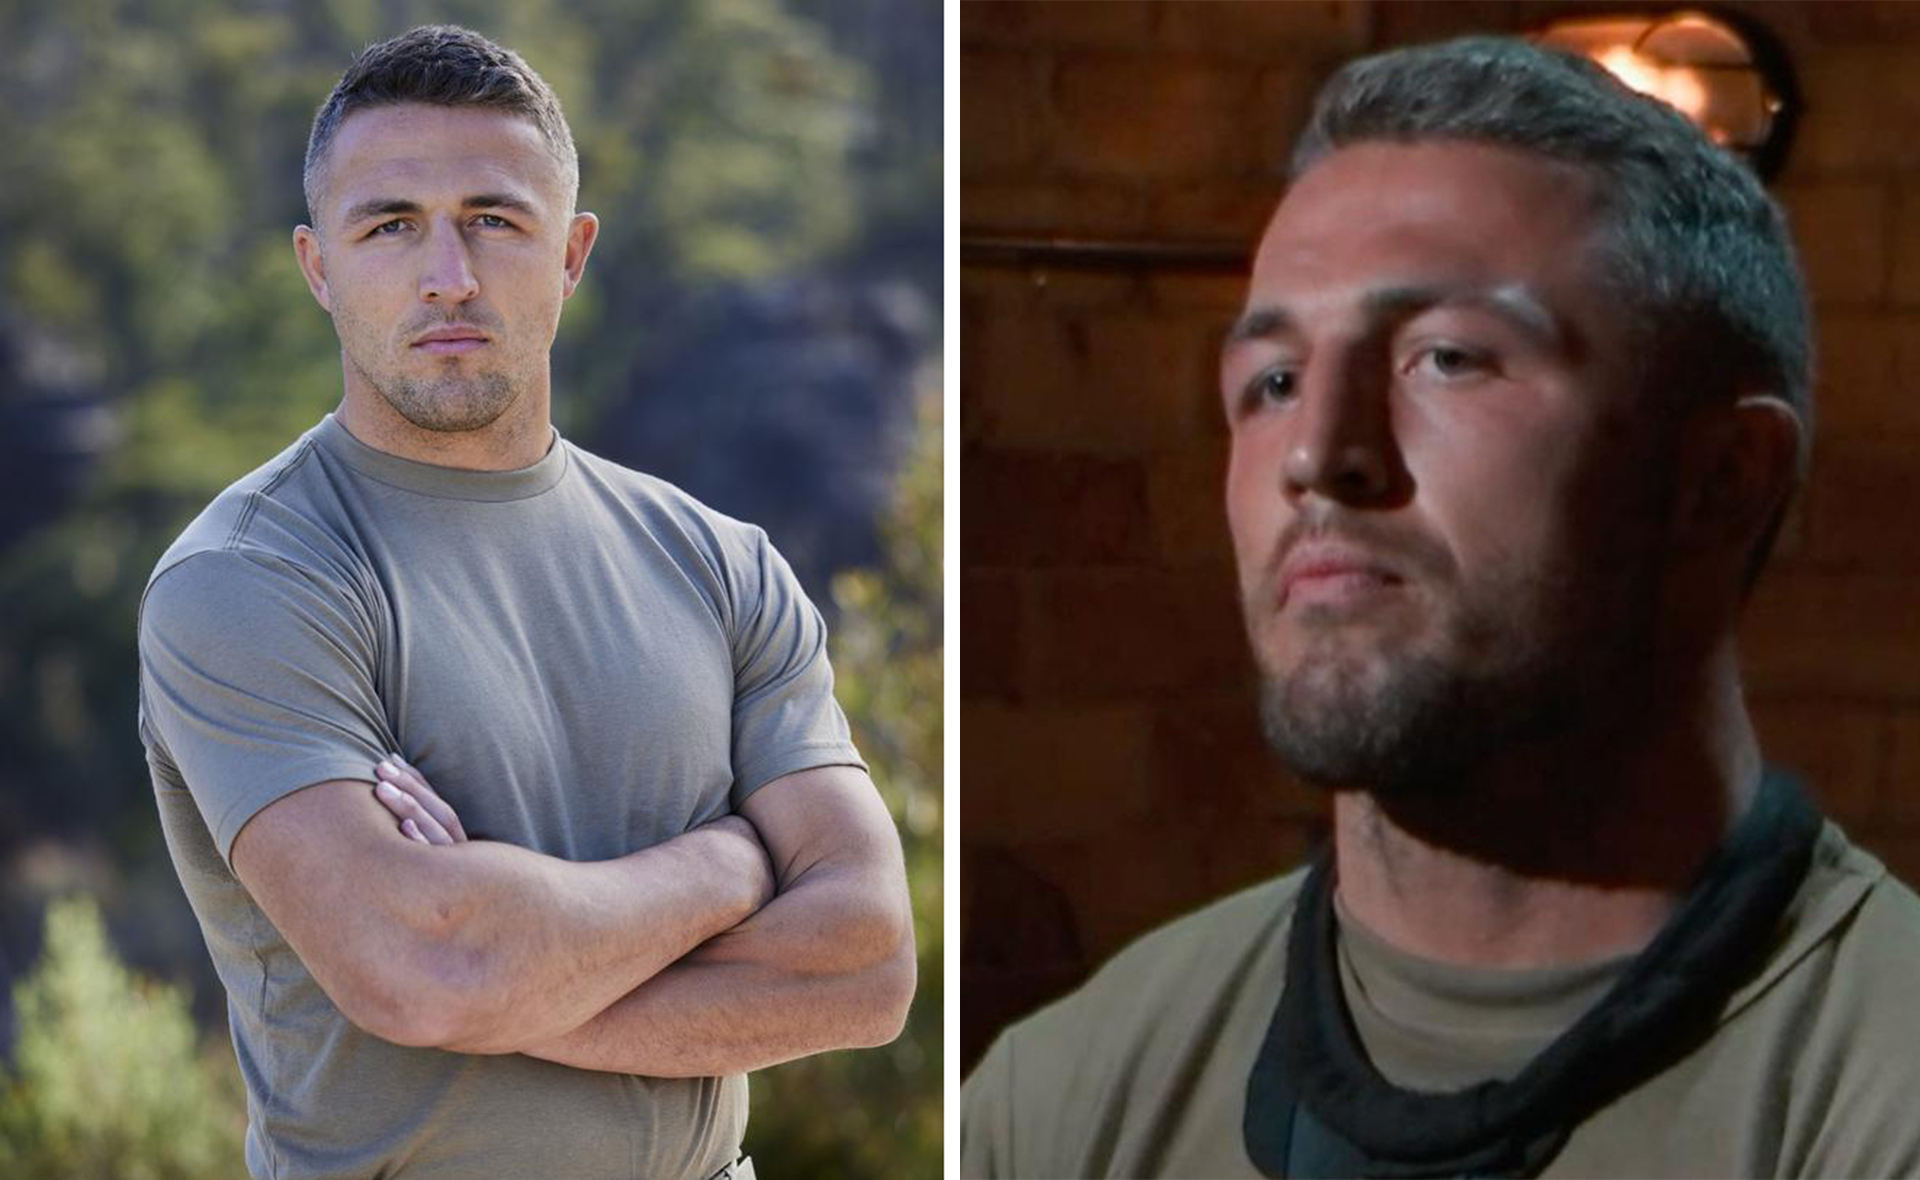 “He was just a really good man”: Sam Burgess tears up over his father’s death on SAS Australia